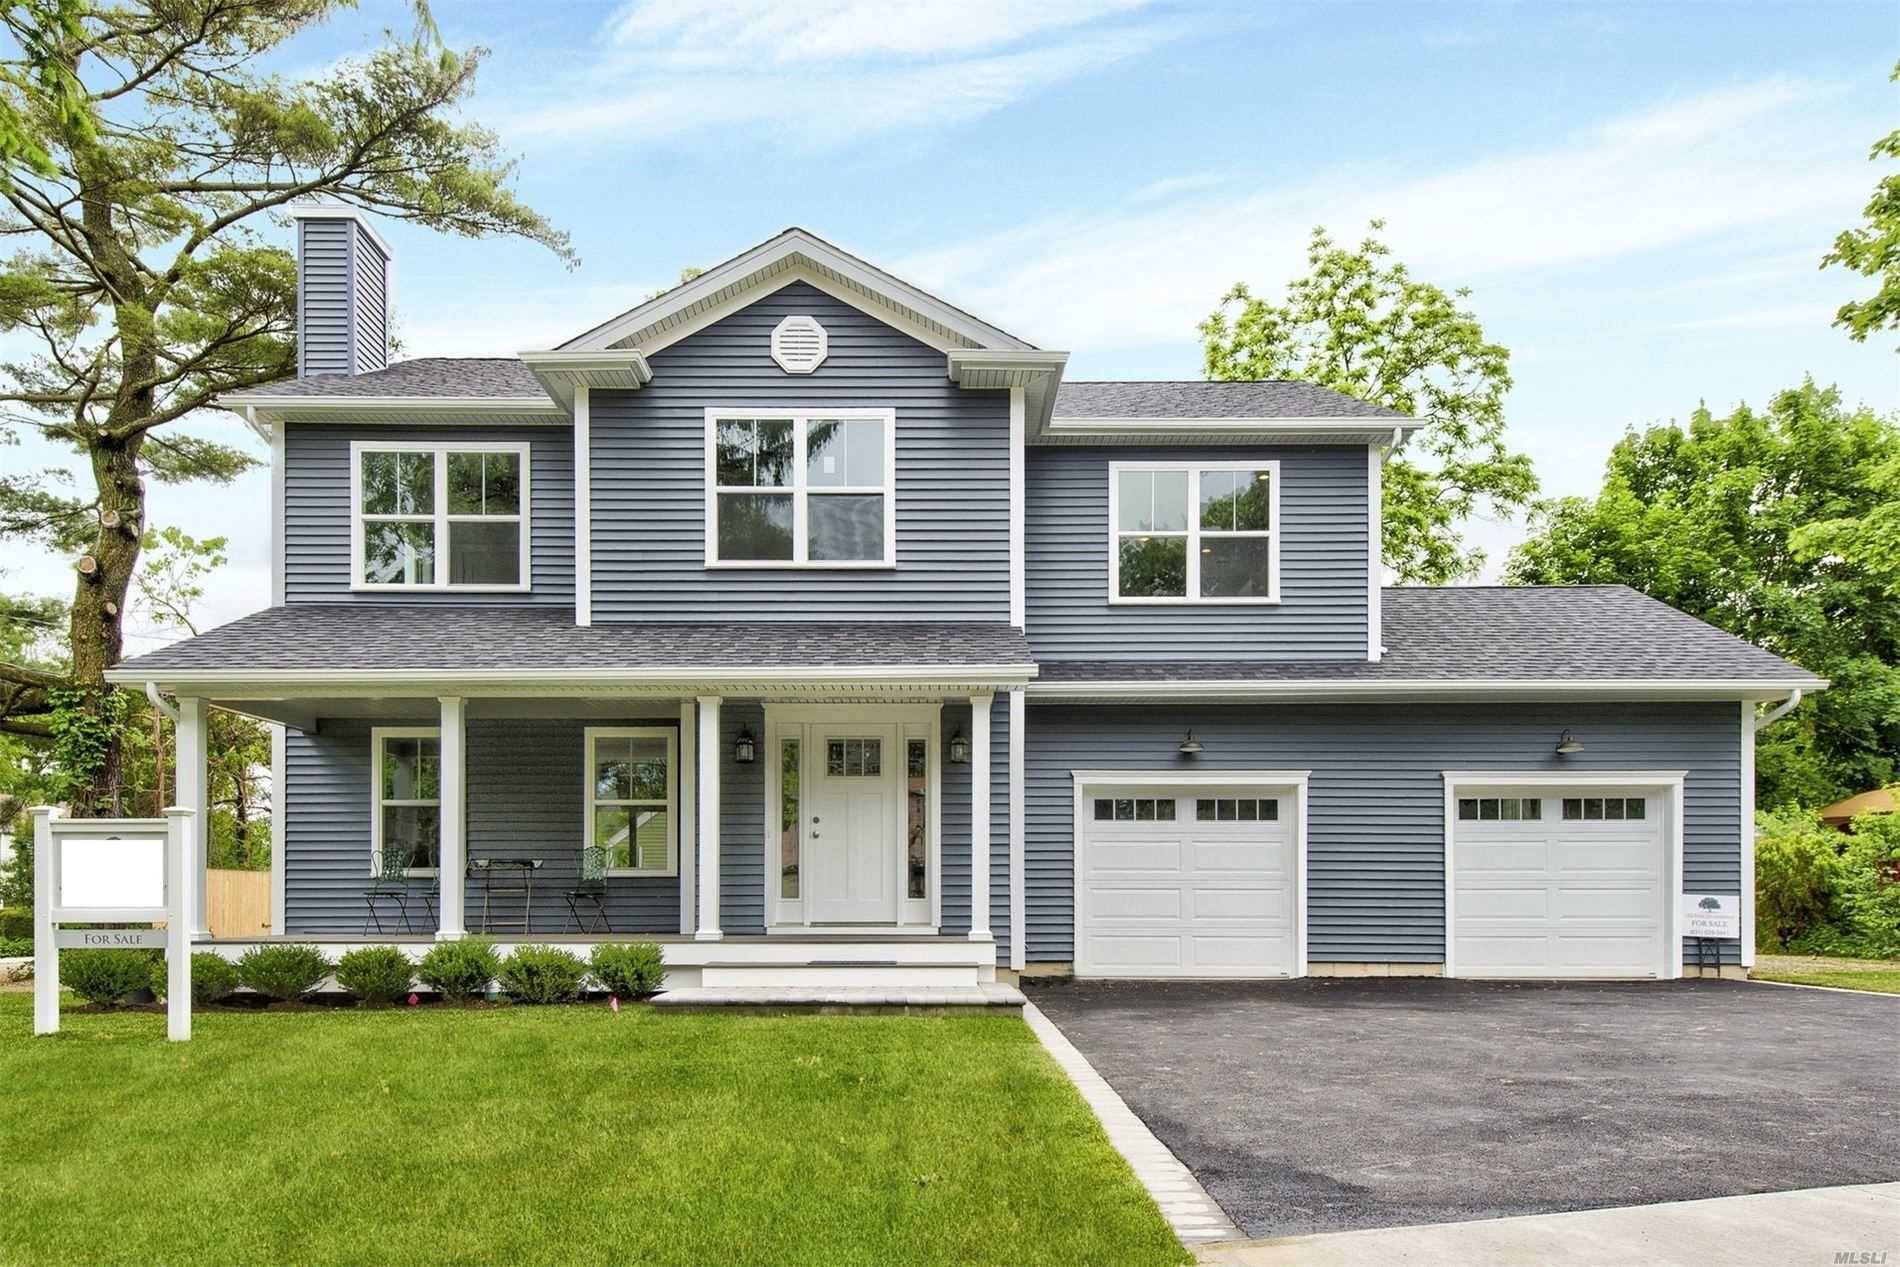 Brand New Custom Construction 2019, Minutes From NSP and close to everything Open Floor Plan, Spacious Rooms, 9 foot ceilings on 1st 8' Basement With Egress Window, 4 Bedrooms, 2 ...